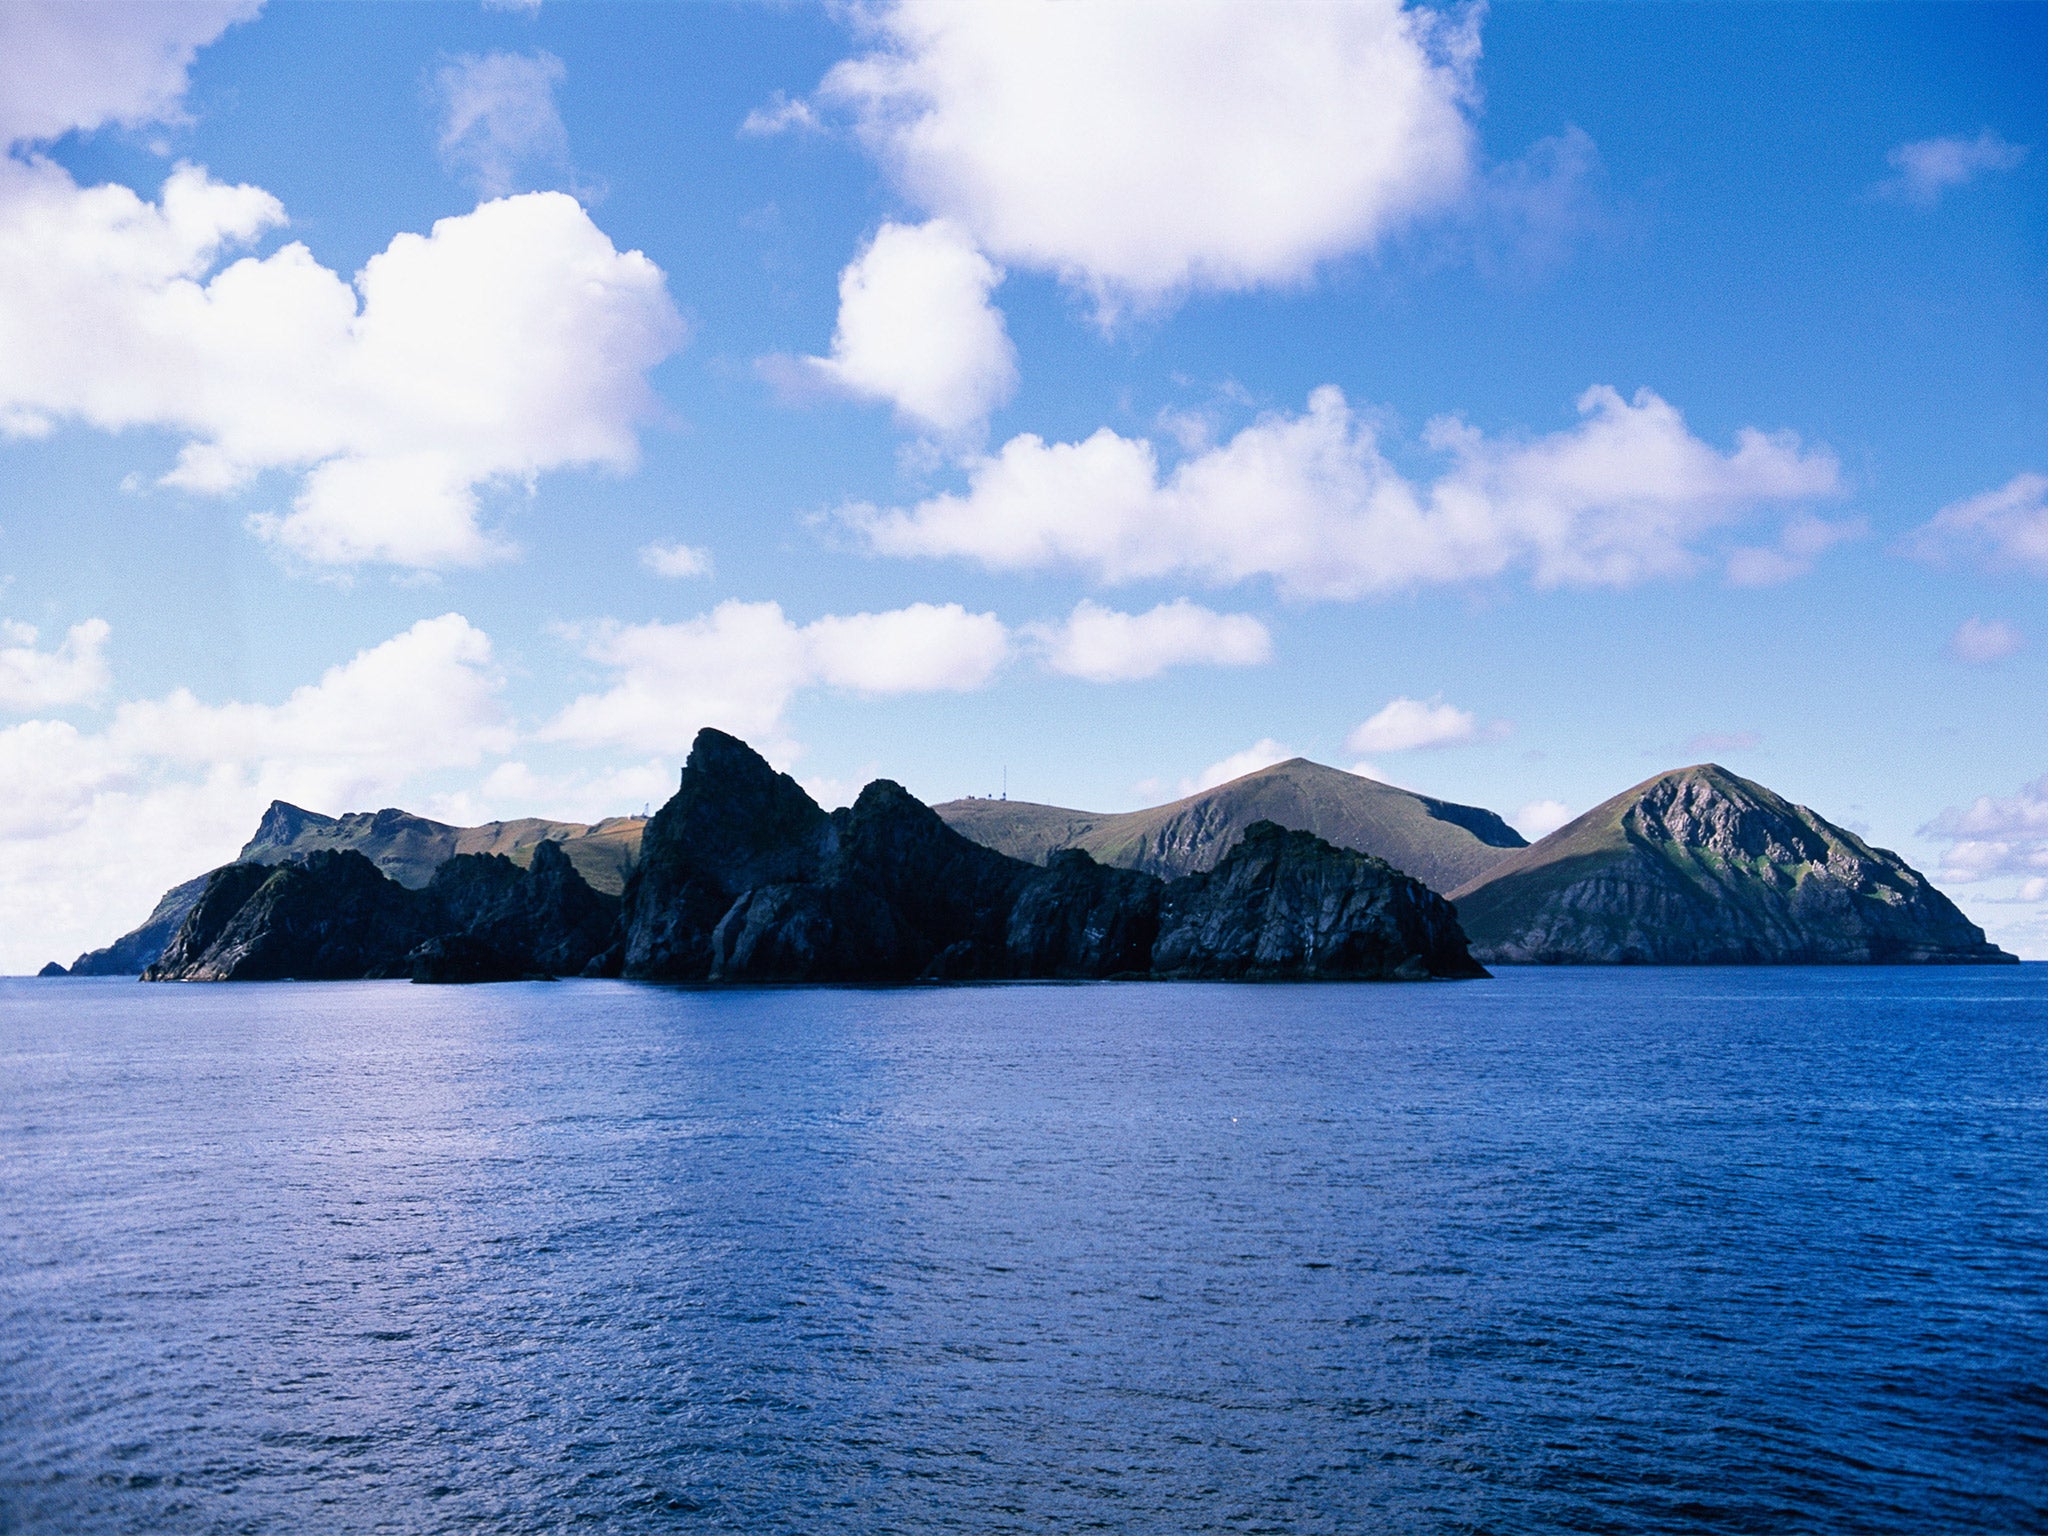 All at sea: St Kilda, the archipelago of volcanic islands and sea stacks situated 40 miles west of the Outer Hebrides